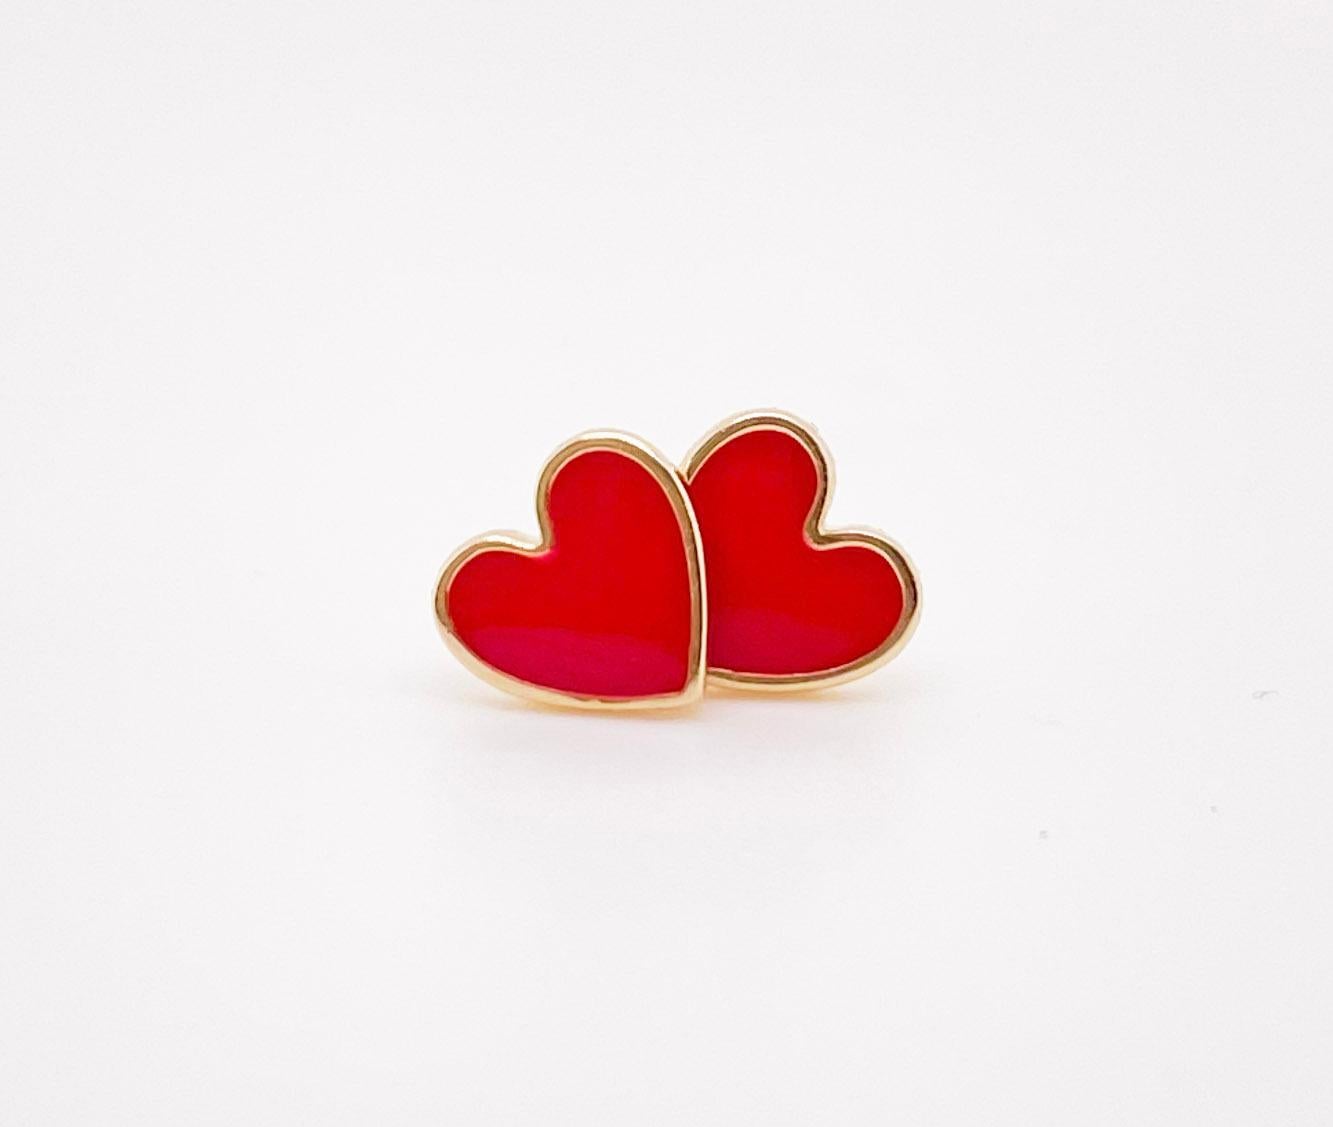 Love Earrings are the perfect for anyone to show everyone how much you are loved! These earrings are precious in any hole on the ear. Red is the sign of Love! The details for these gorgeous earrings are listed below:
1 Set
Metal Quality: 14K Yellow